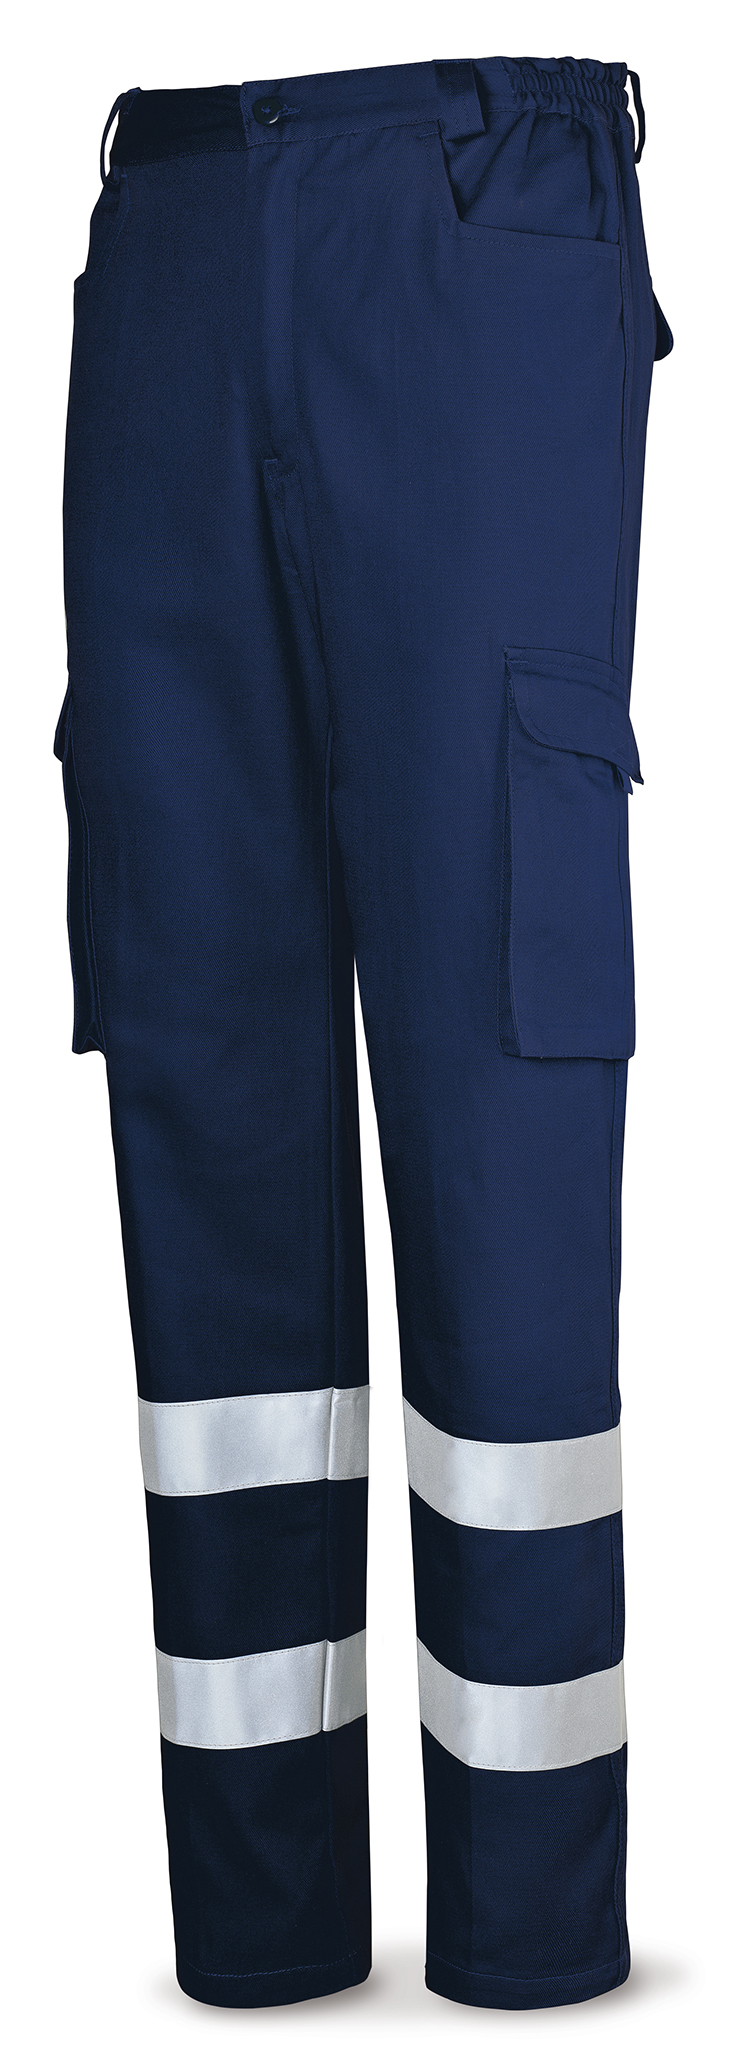 488-PACR Top Workwear Top Series Navy blue cotton pants with reflective stripes 245 g.